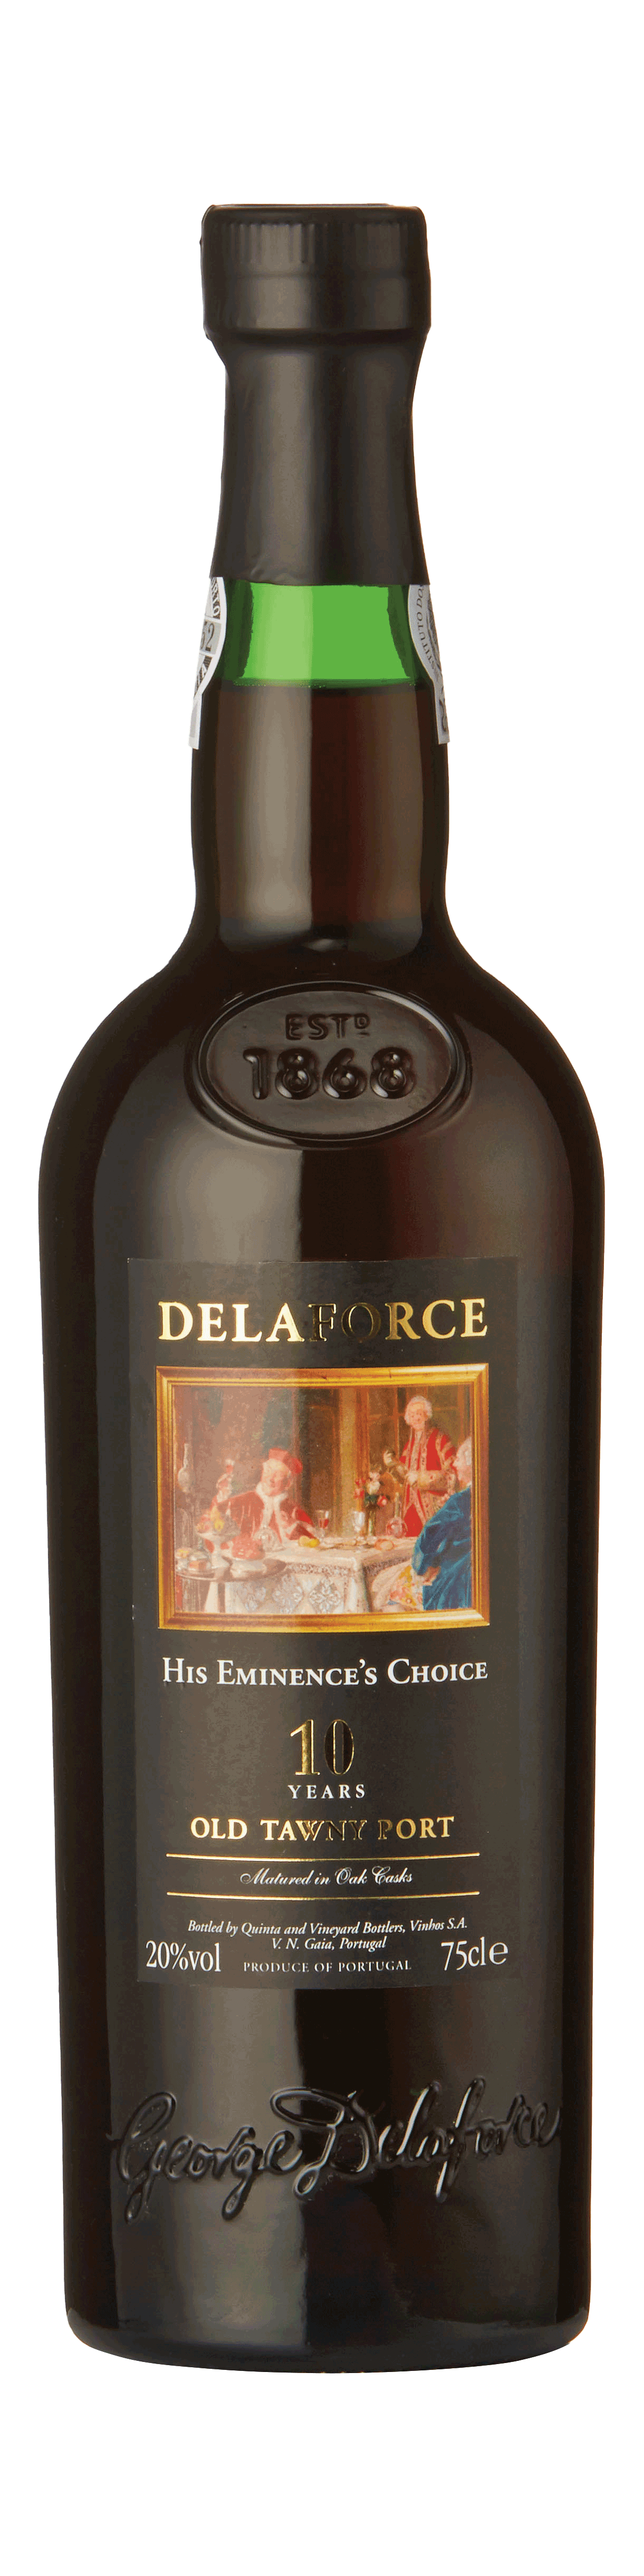 Bottle shot - Delaforce, 'His Eminence’s Choice', 10 Year Old Port, Douro, Portugal